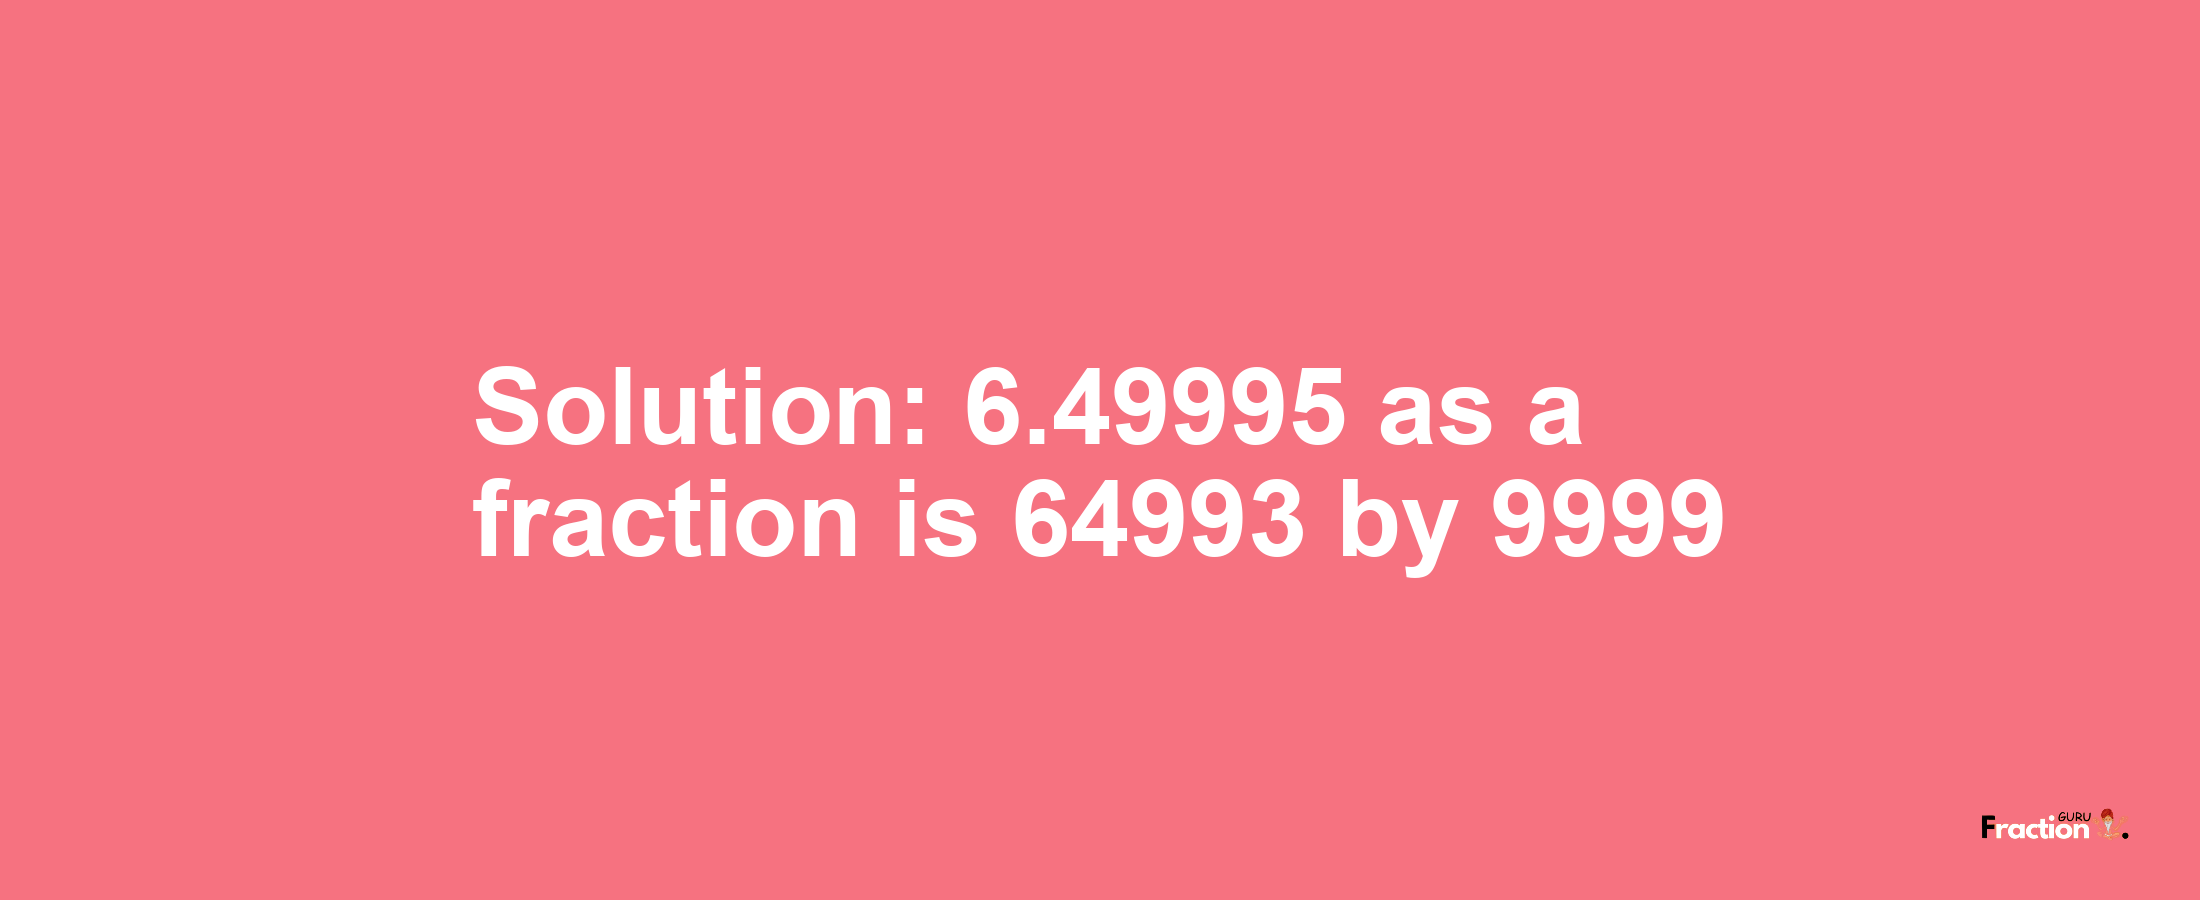 Solution:6.49995 as a fraction is 64993/9999